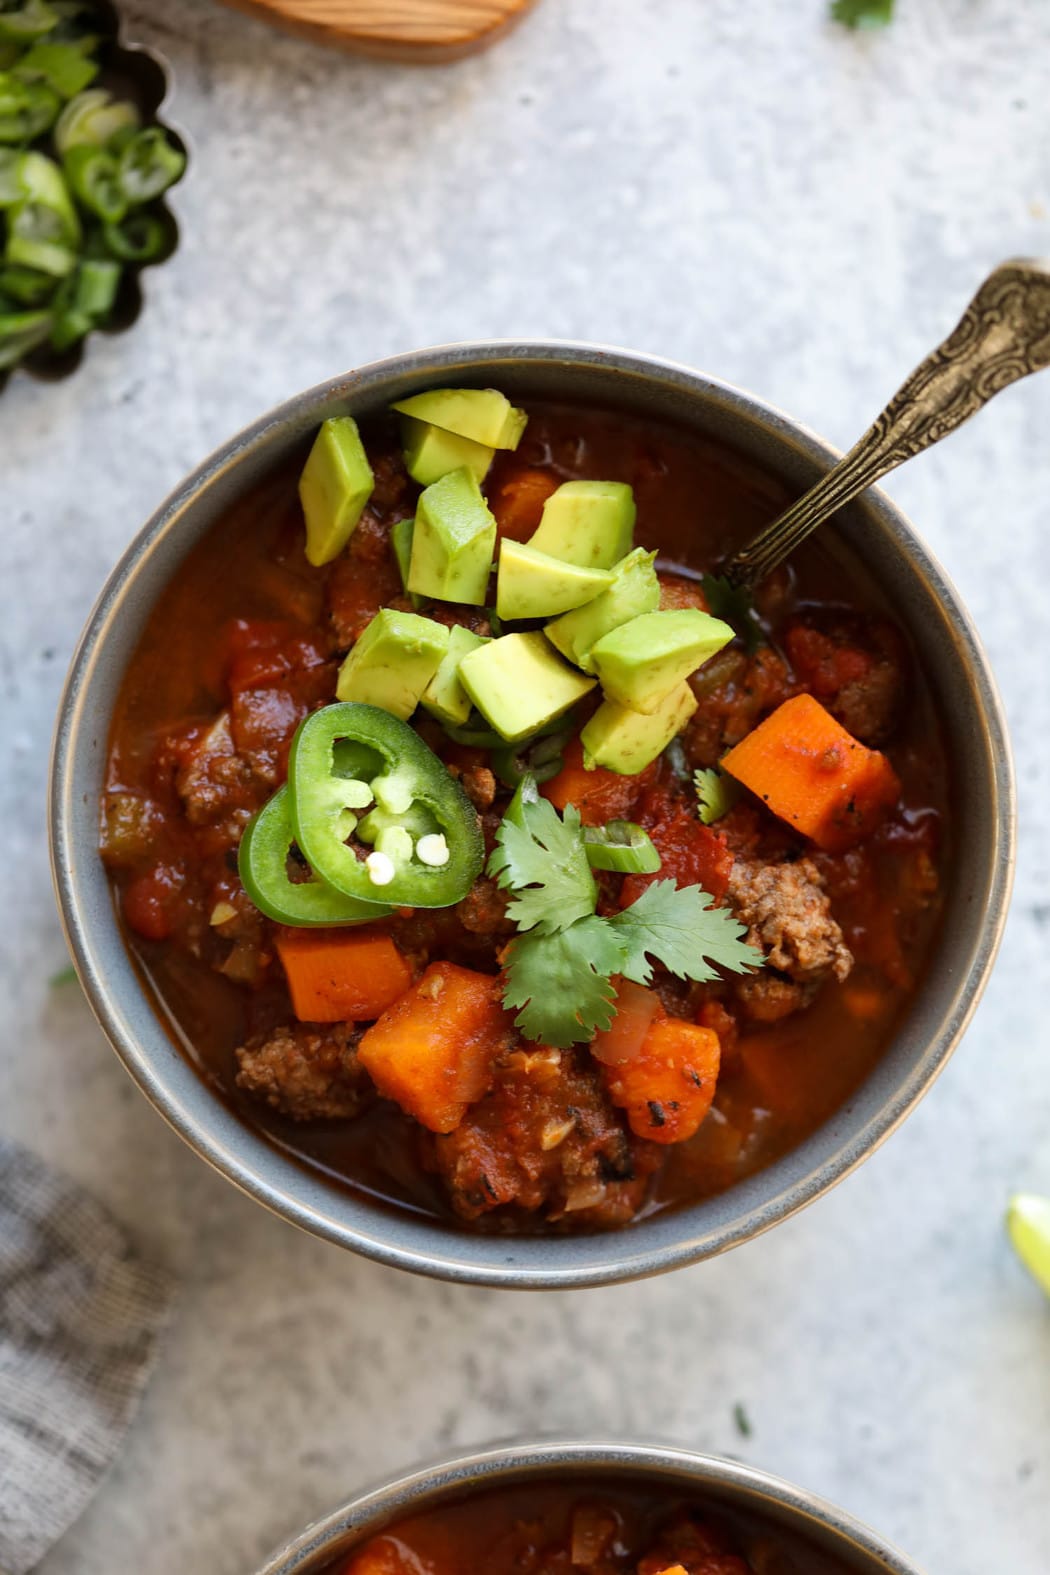 https://therealfooddietitians.com/wp-content/uploads/2017/11/Slow-Cooker-Sweet-Potato-Chili-12-of-13.jpg